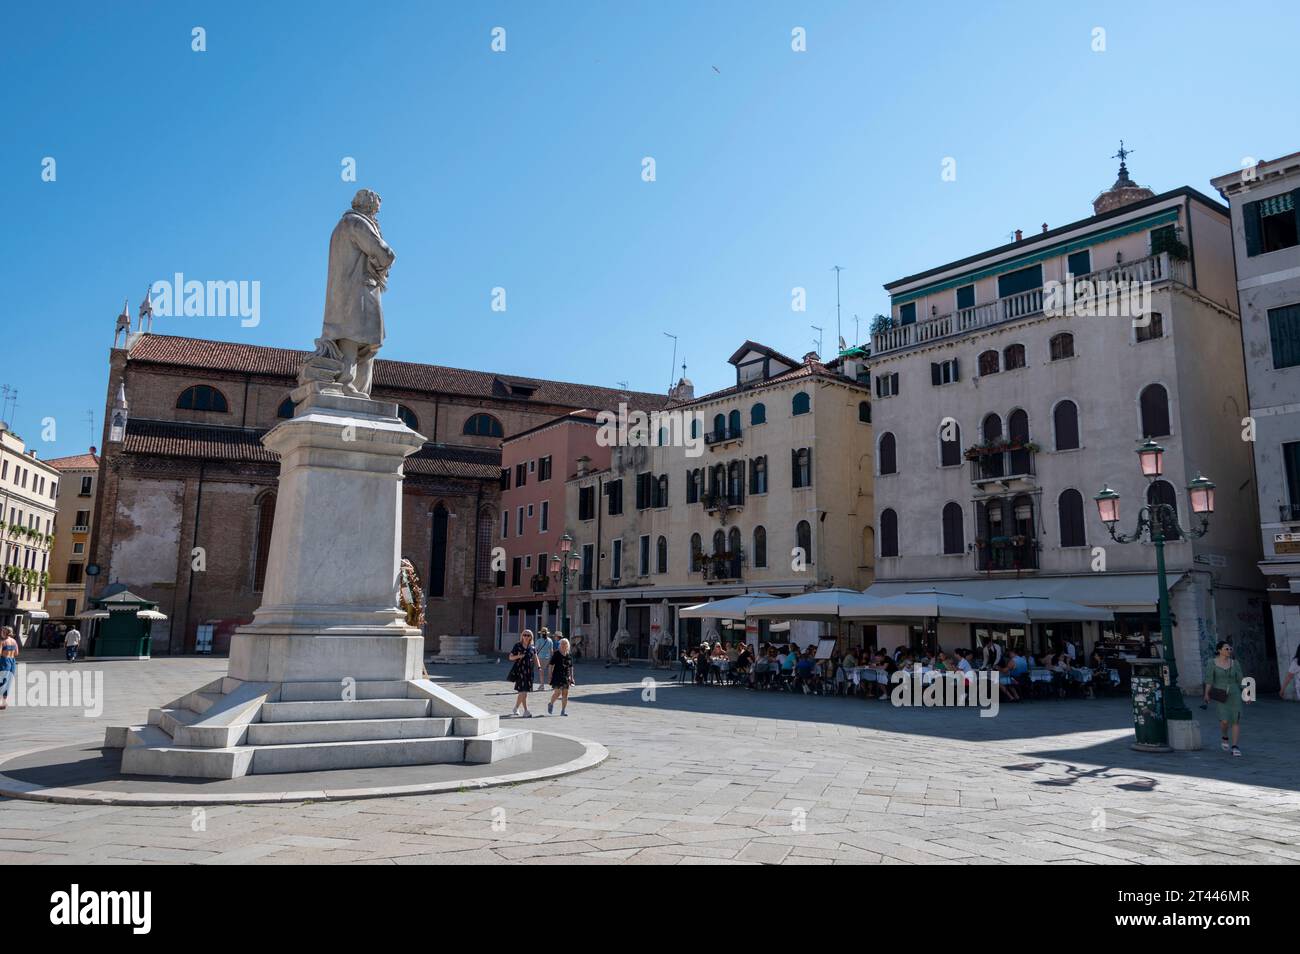 Camp S. Stefano is a large city square lined with cafes, restaurants and nightclubs popular with tourists near the Ponte dell'Accademia, in Venice in the Stock Photo